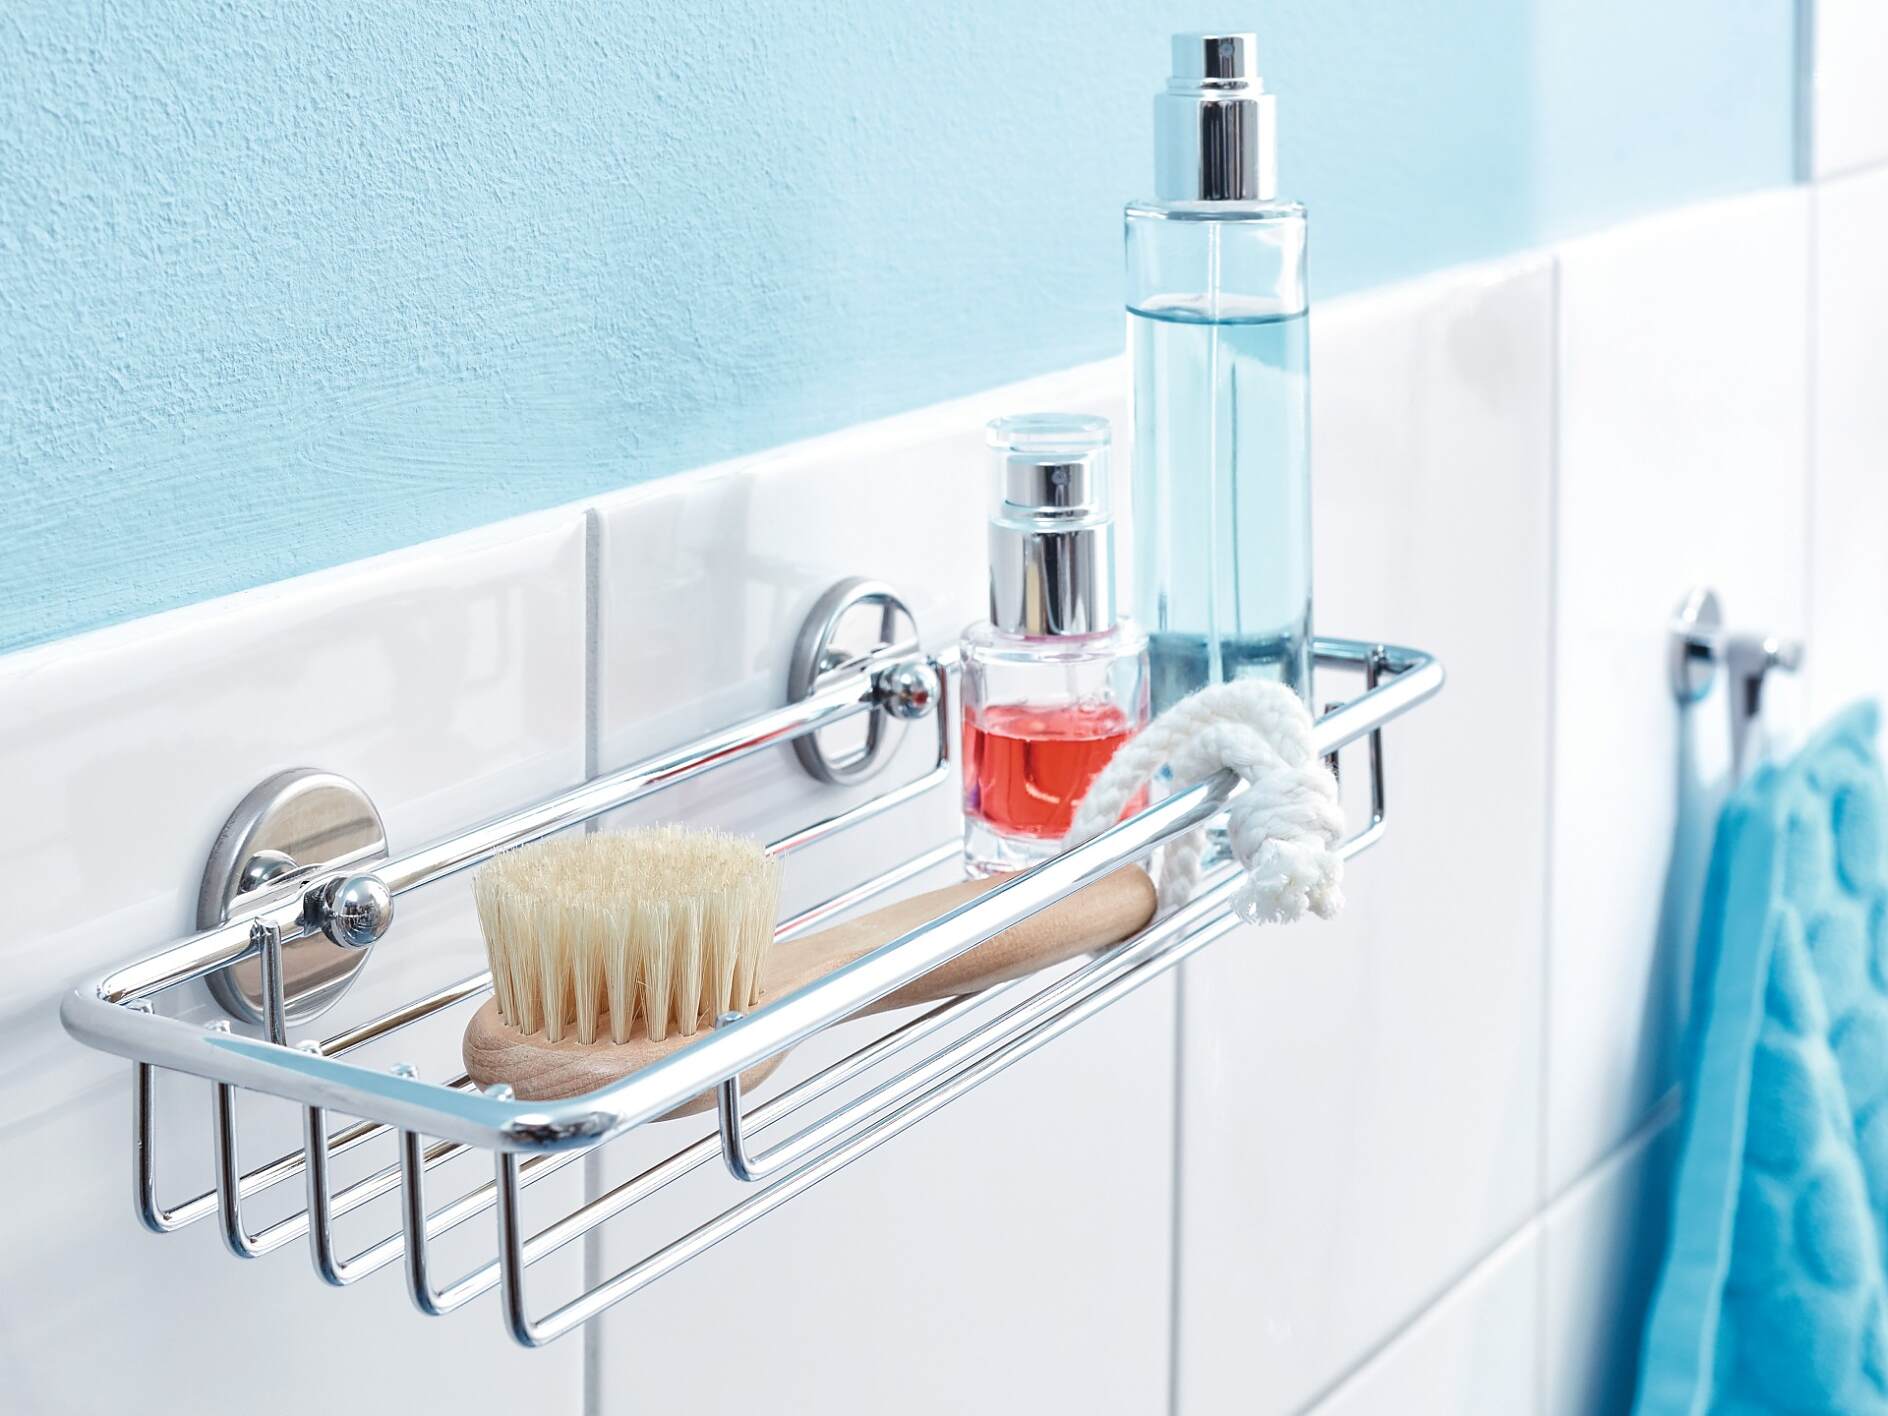 How To Remove Adhesive From A Shower Caddy